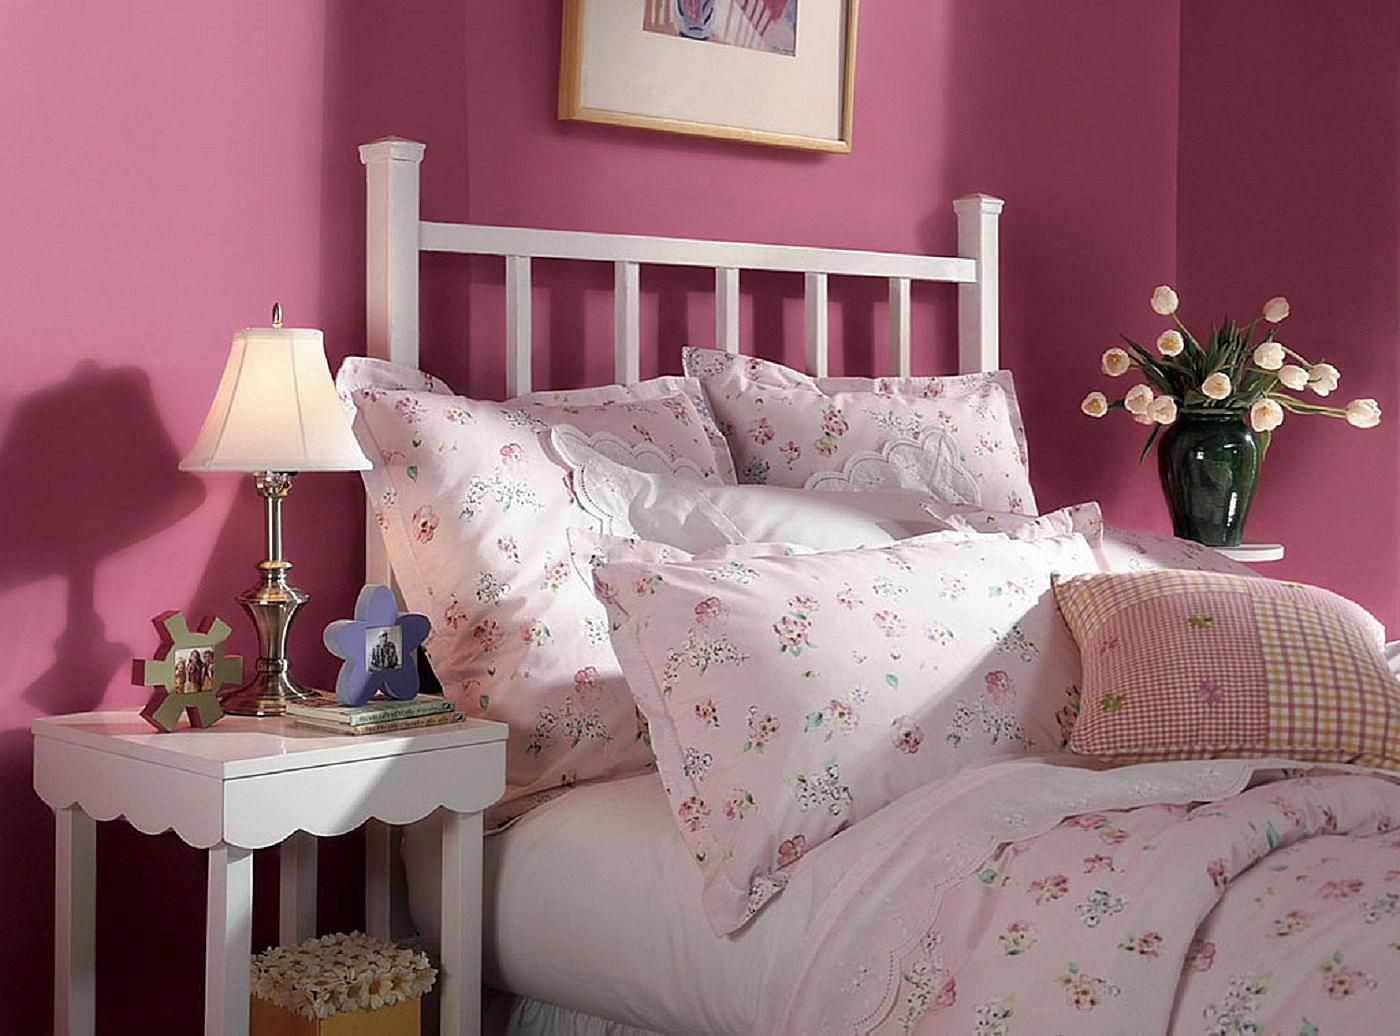 Purple Paint For Bedroom
 10 Great Pink and Purple Paint Colors for the Bedroom